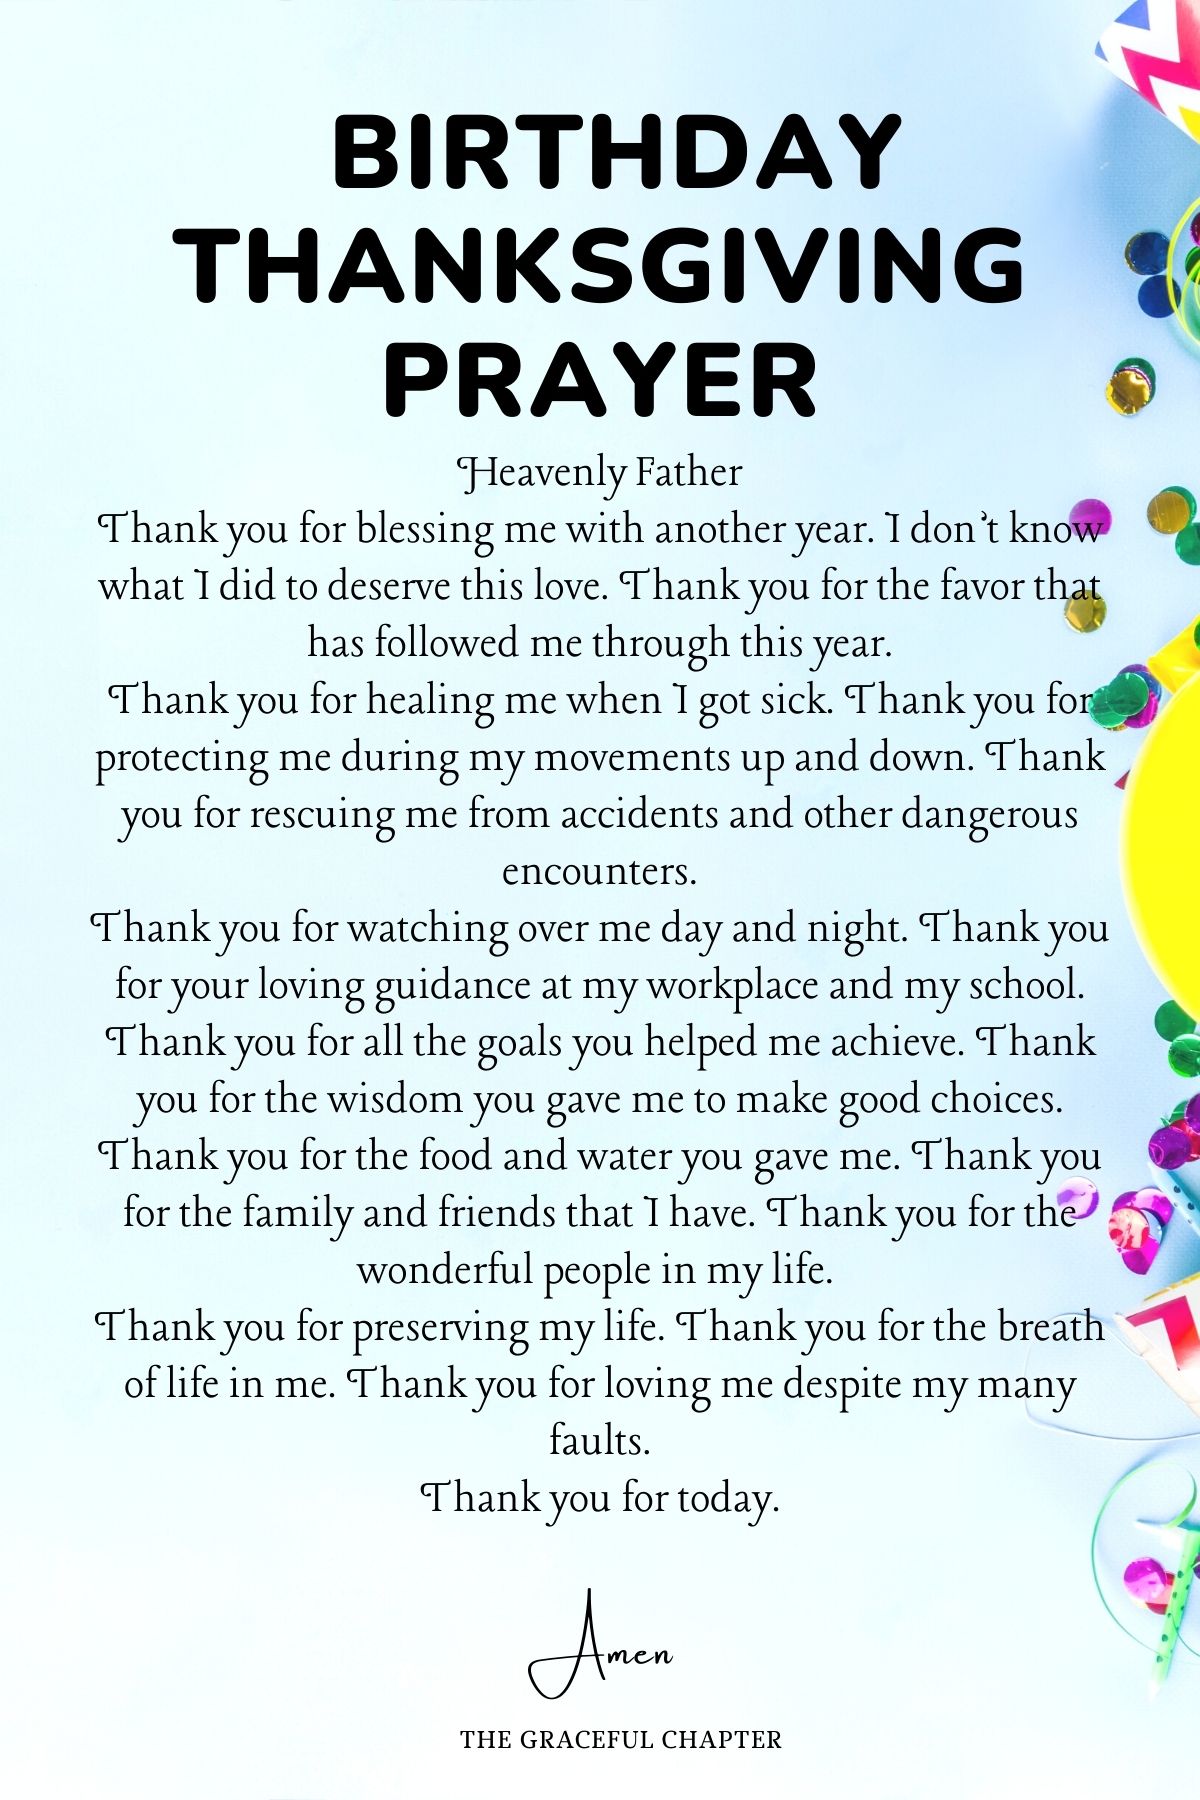 16 Beautiful Birthday Prayers To Make The Day Even More Special - The Graceful Chapter